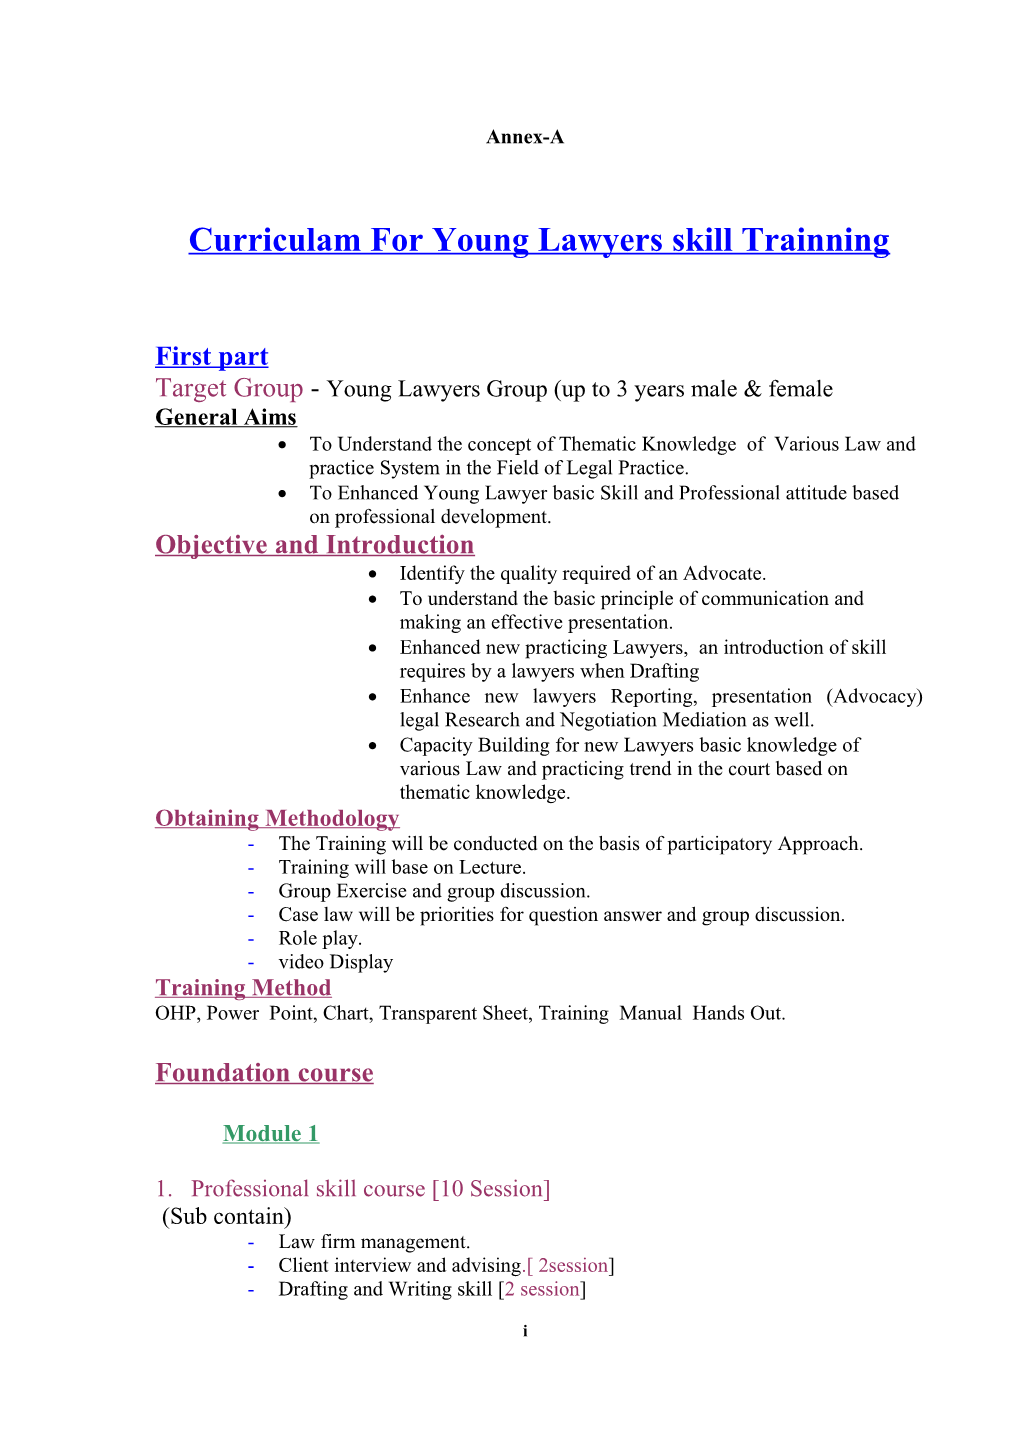 Curriculam for Young Lawyers Skill Trainning